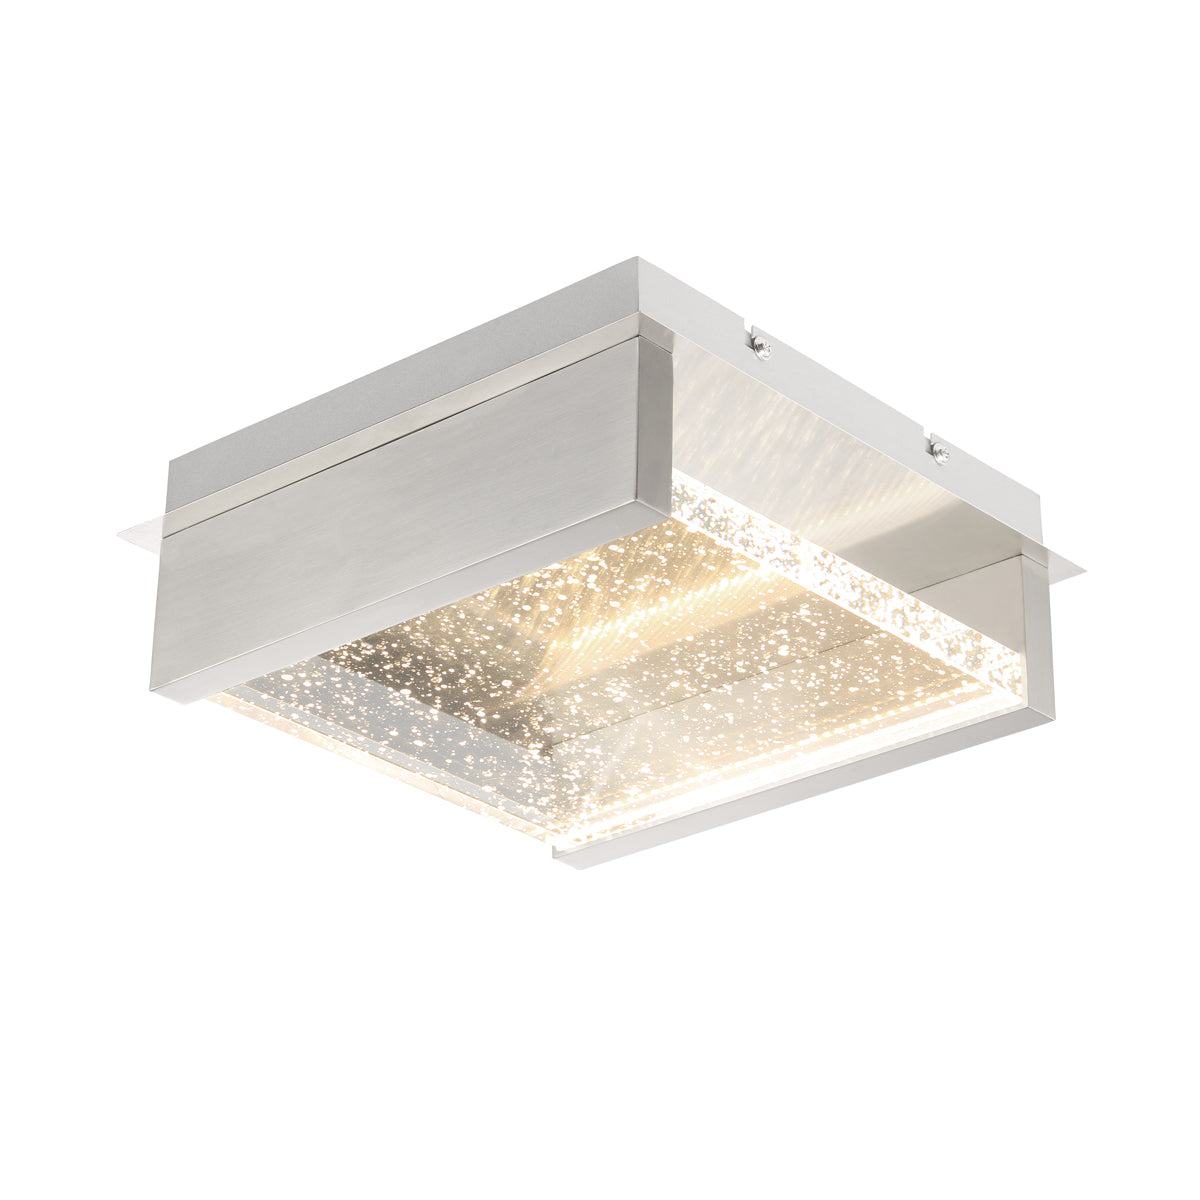 Paradiso Outdoor Ceiling Light